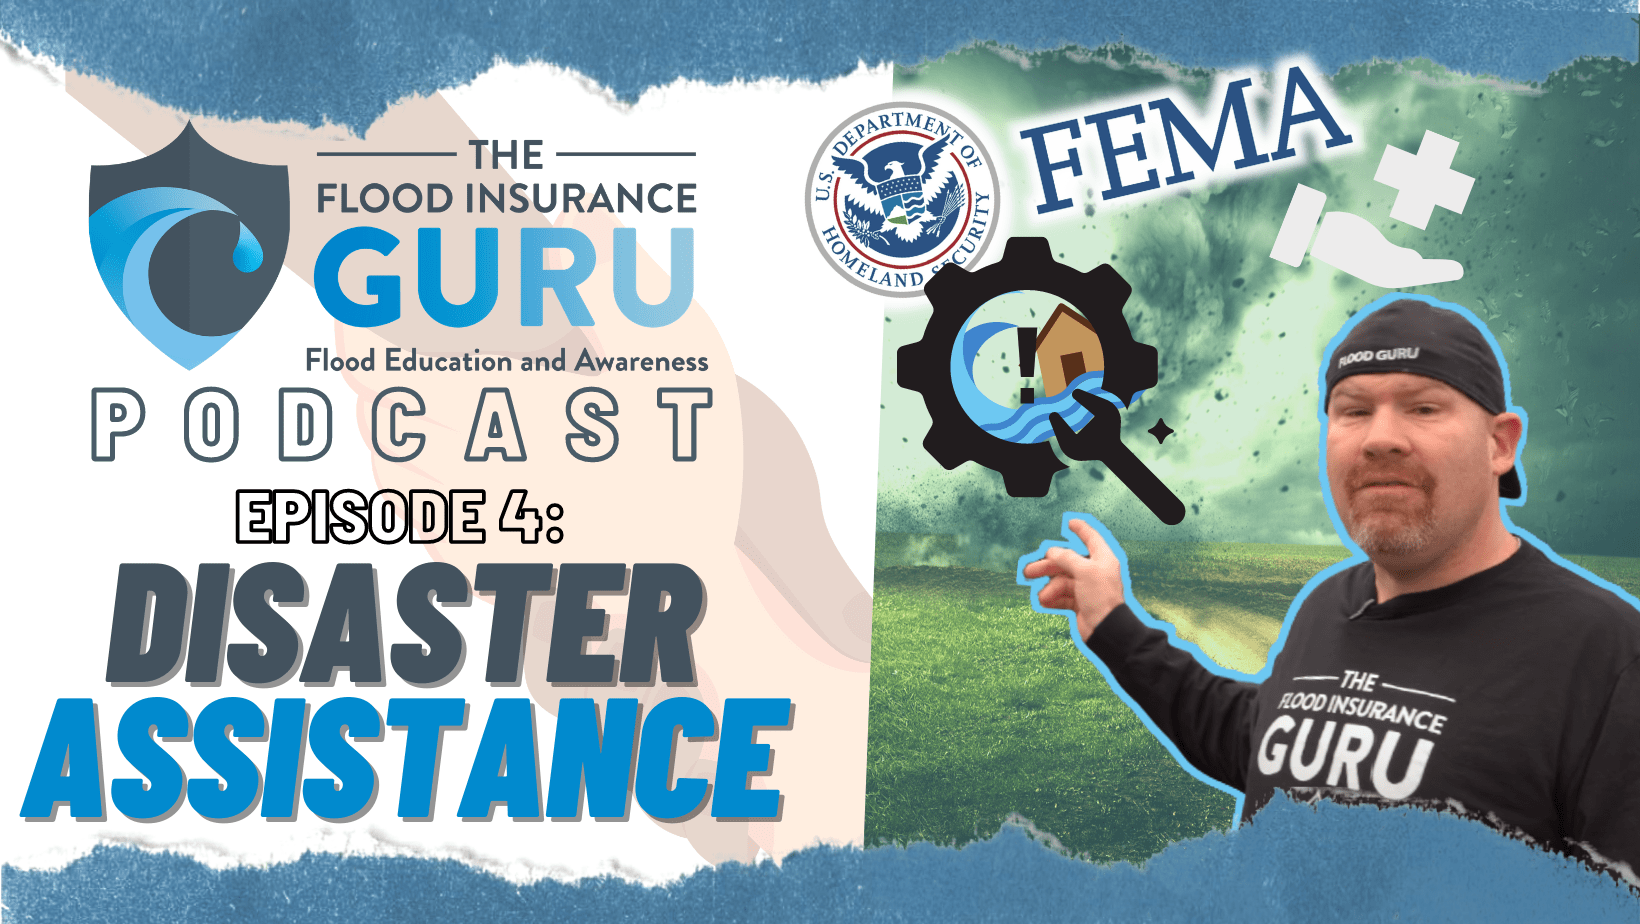 The Flood Insurance Guru Podcast | Episode 4 | What is Disaster Assistance?